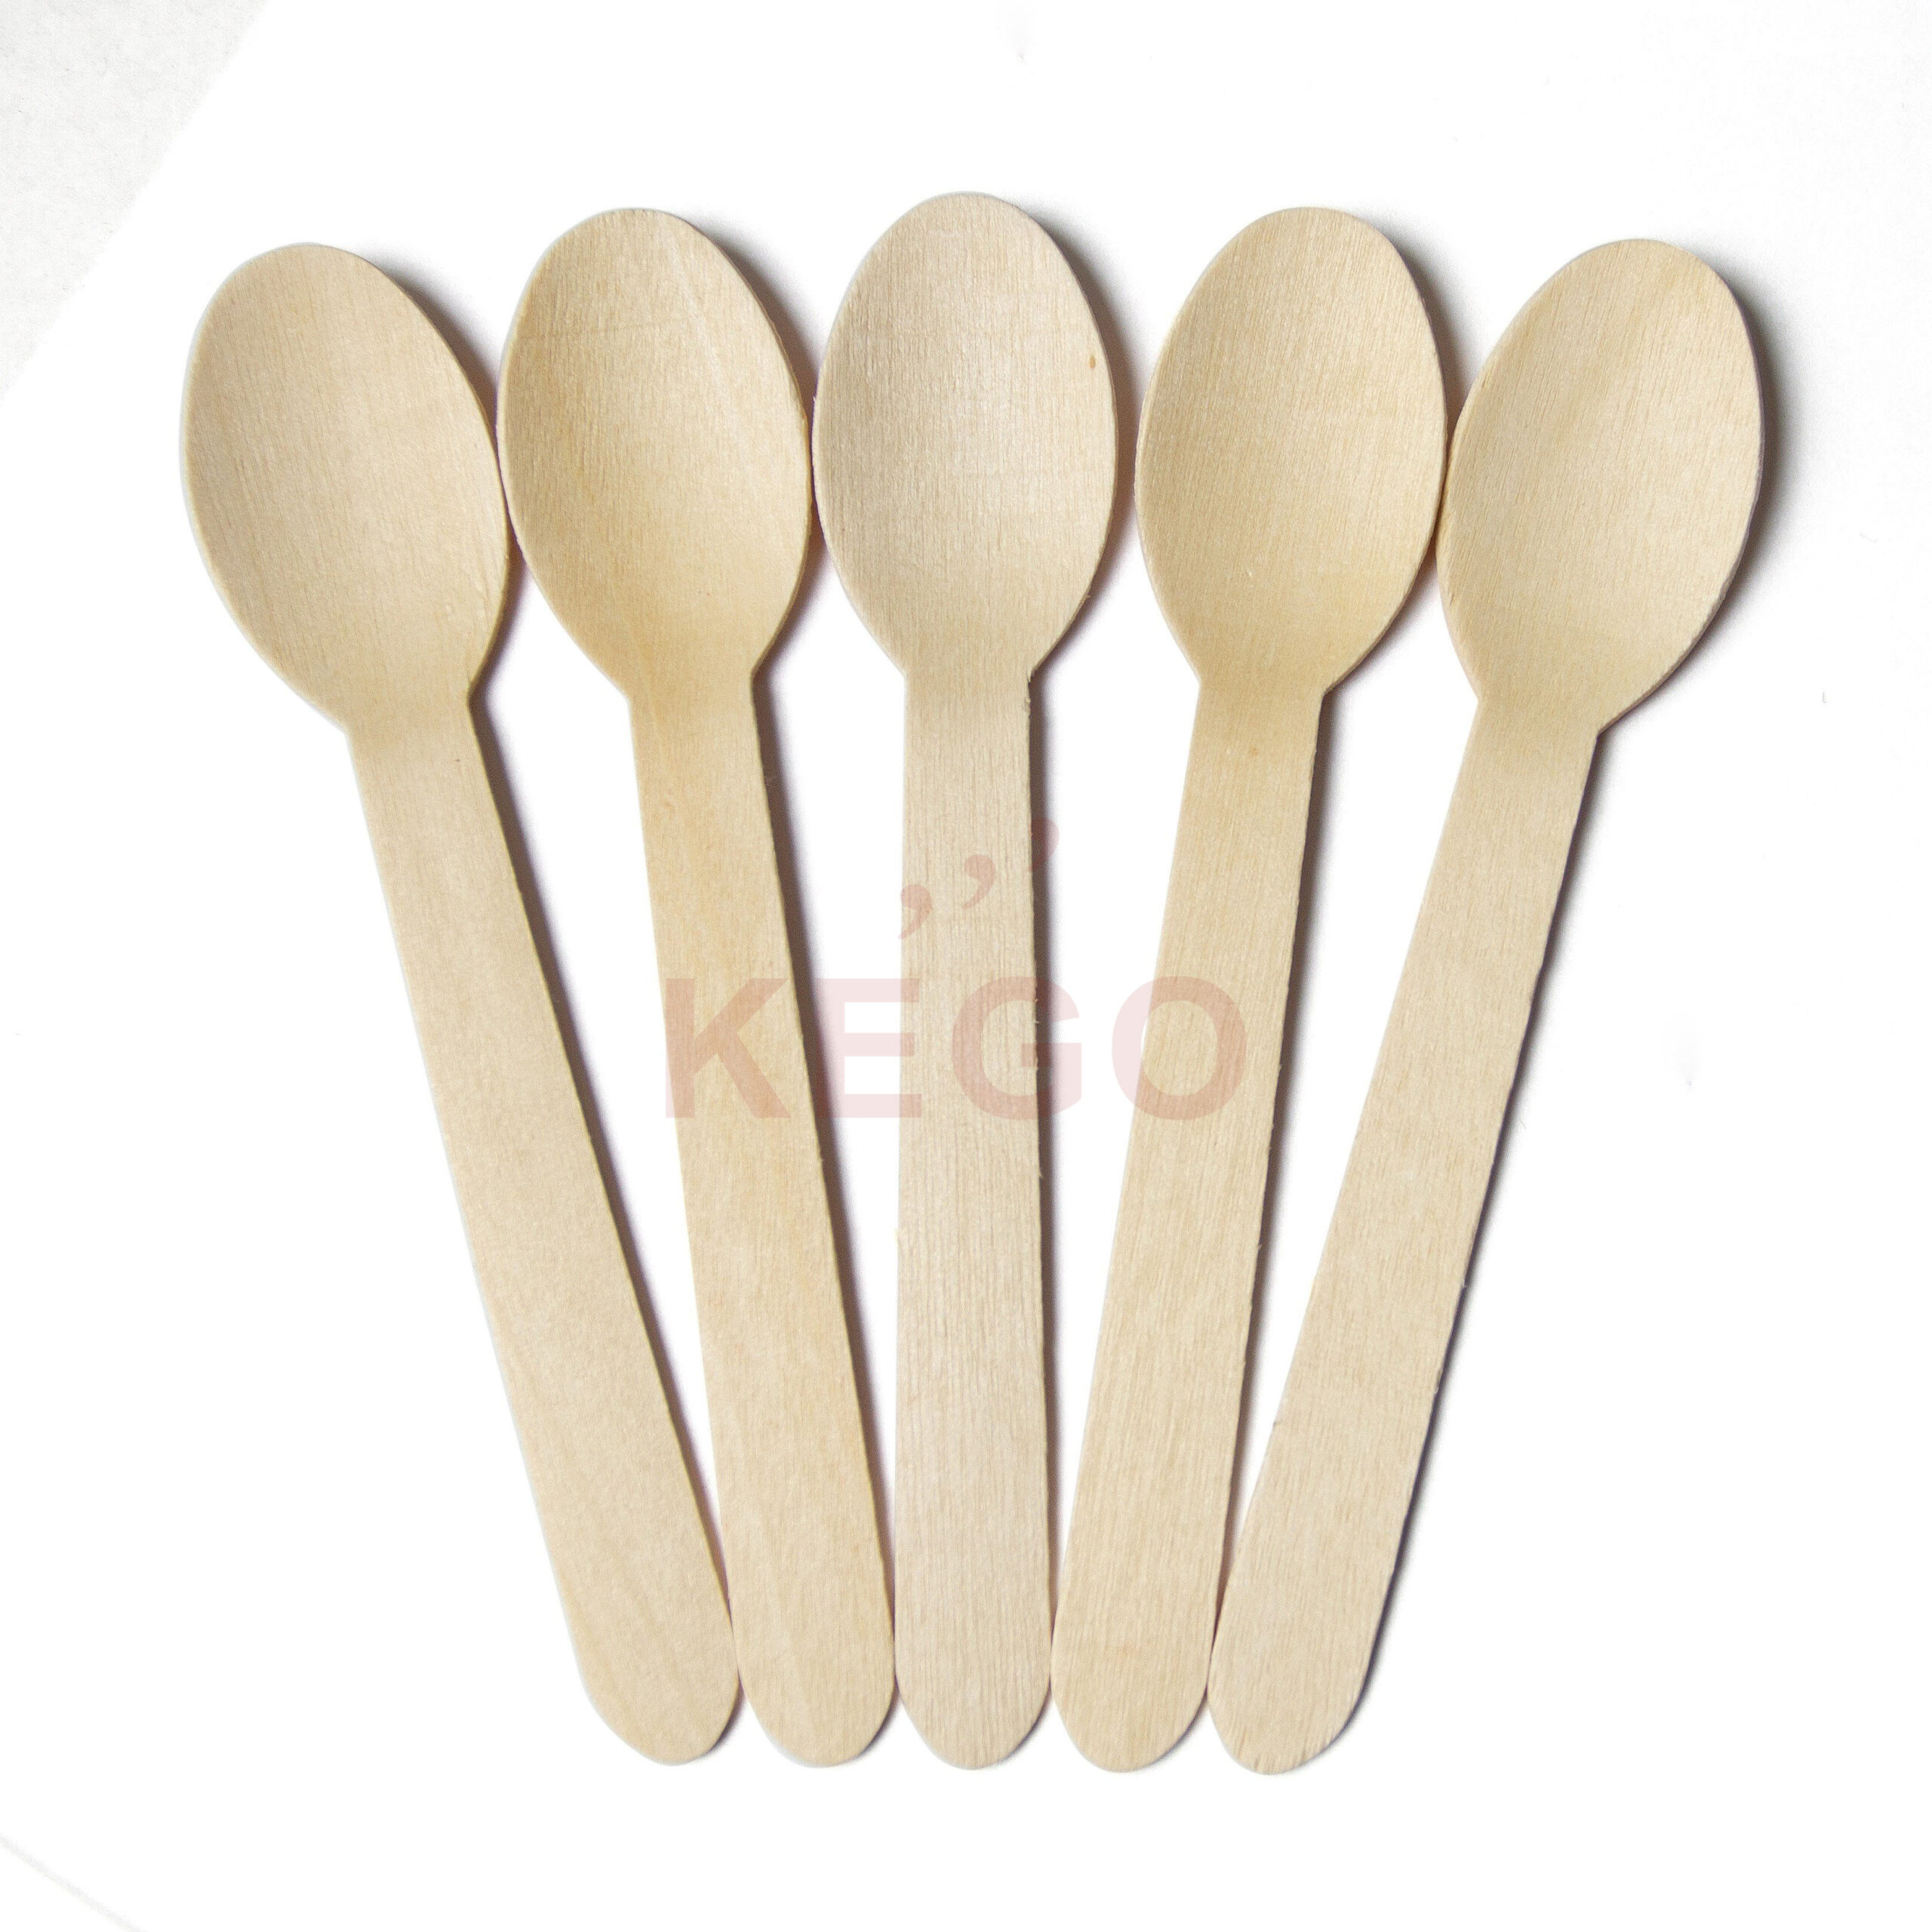 https://kego.vn/wp-content/uploads/2016/10/Disposable-Wooden-Spoon-160-2-scaled.jpg